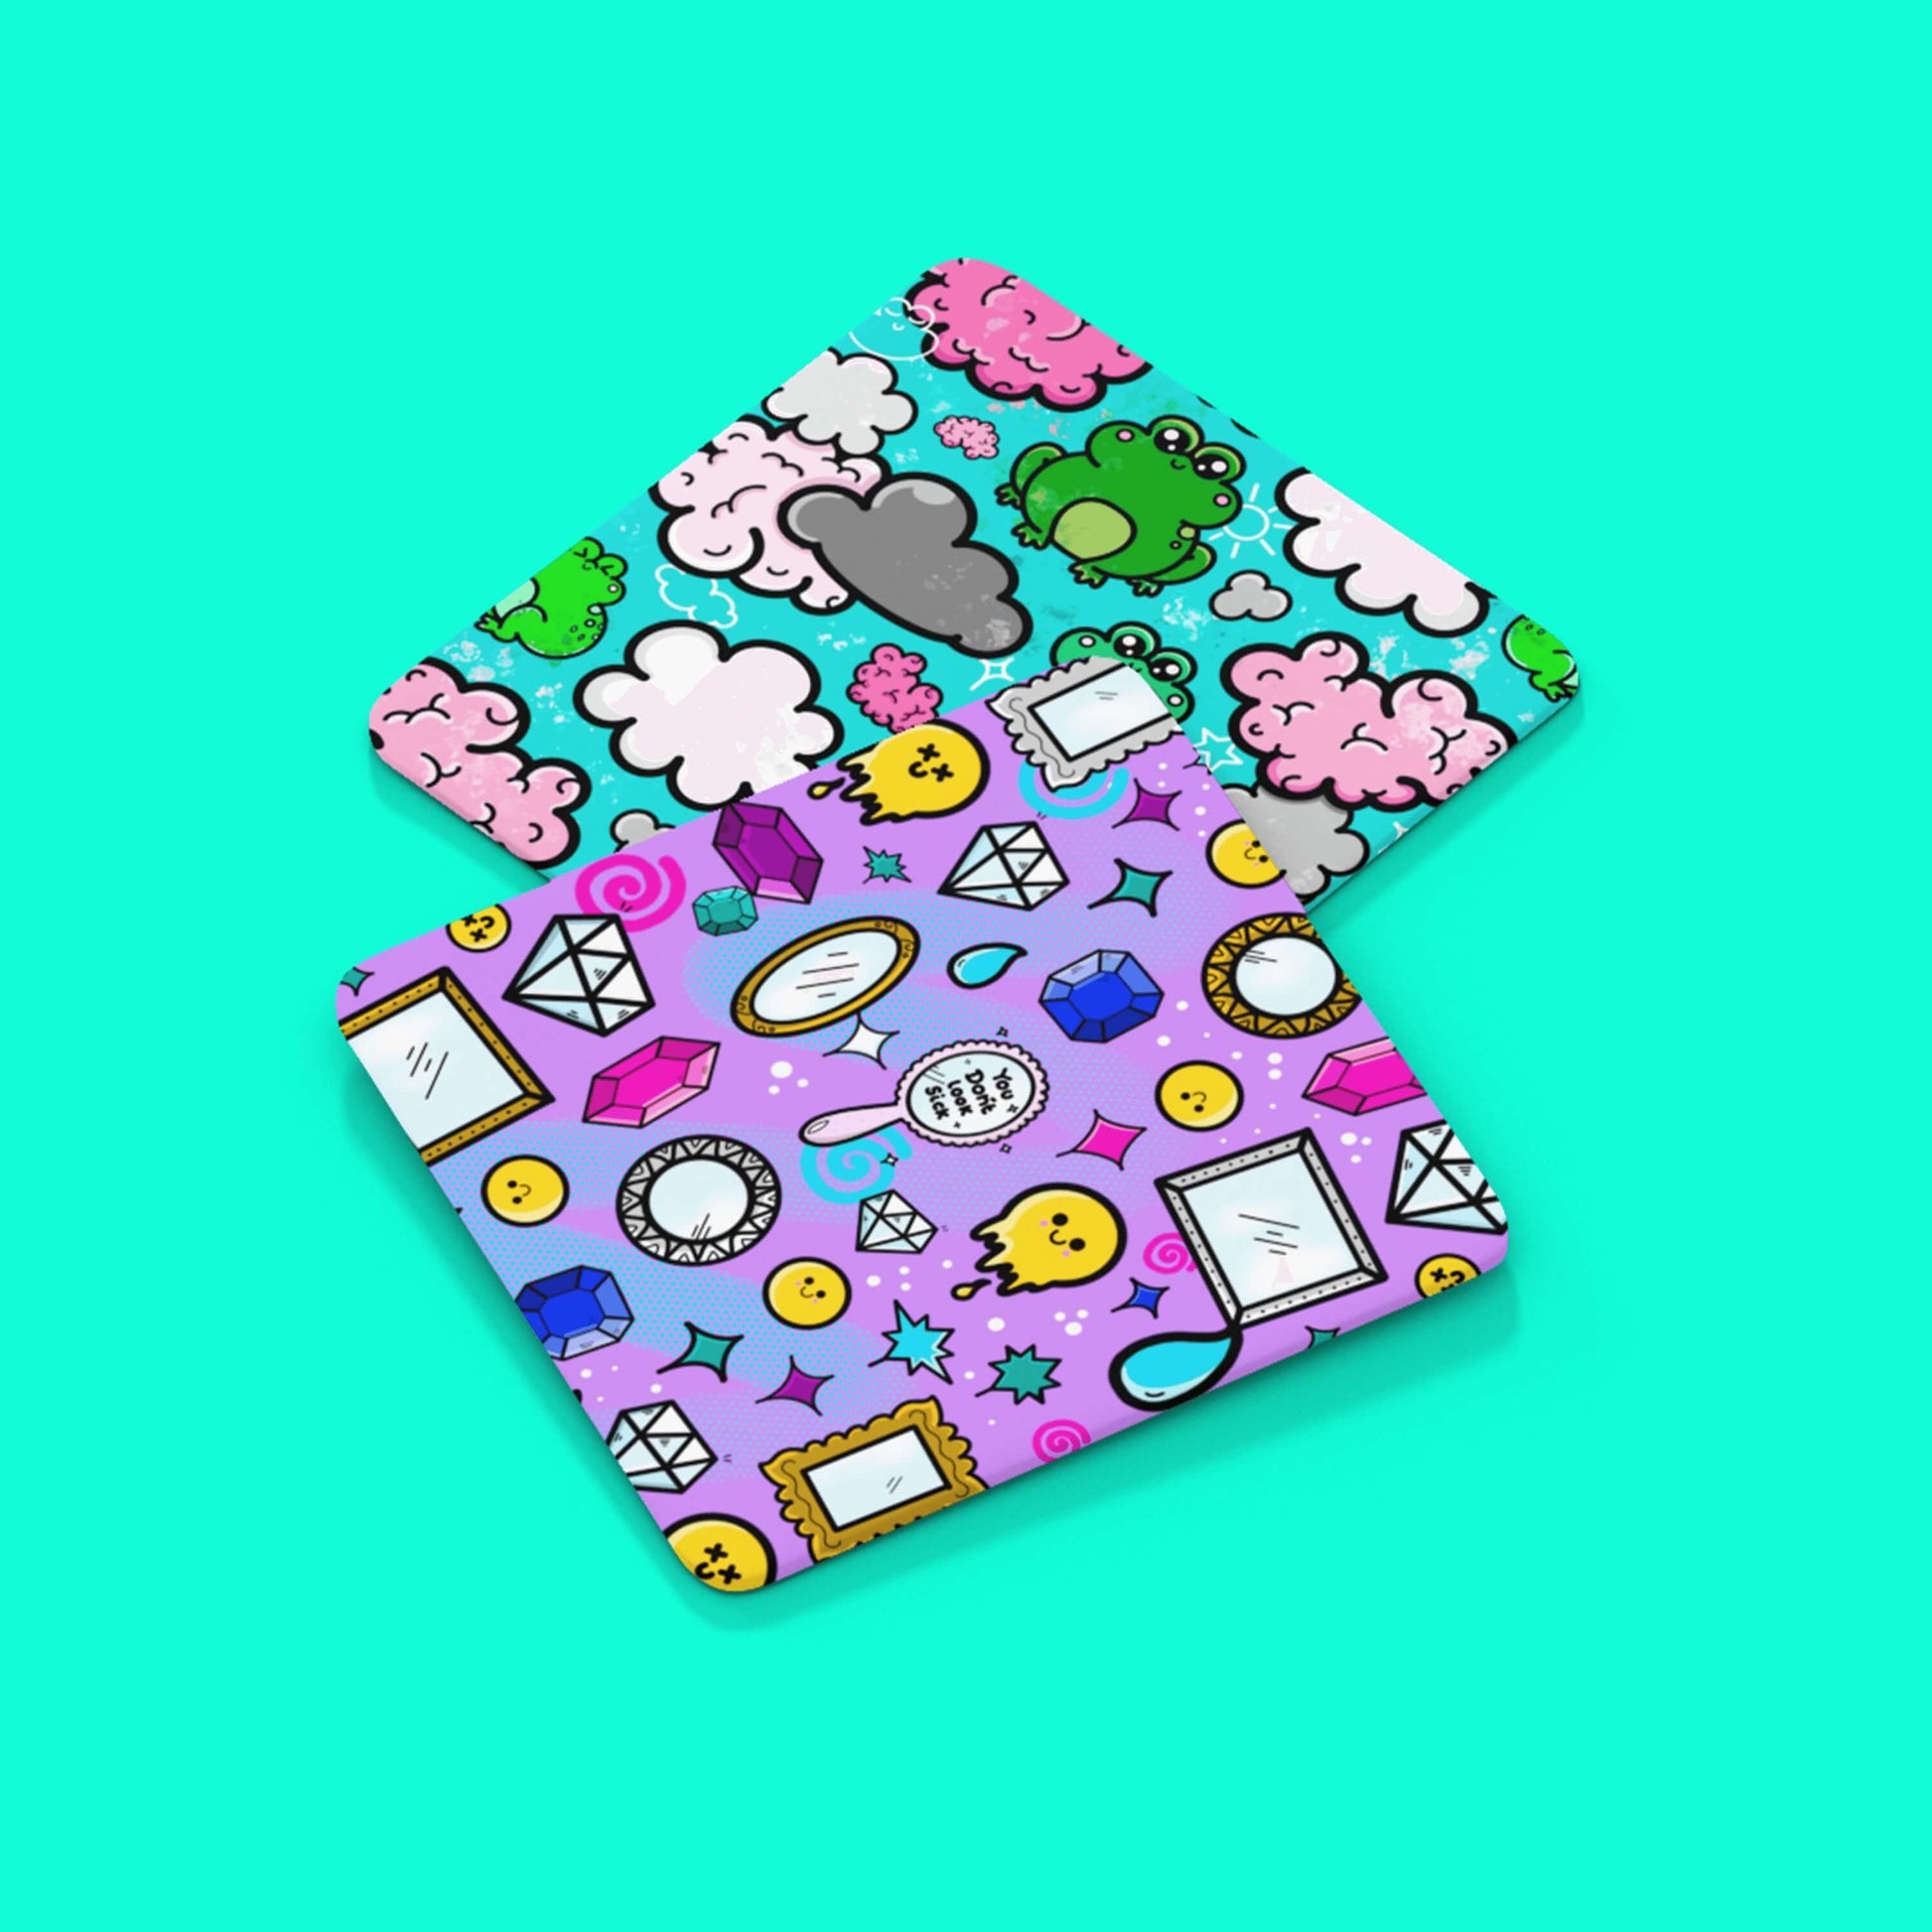 Brain Frog Coaster - Brain Fog on a blue background with the You Don't Look Sick Coaster. The wooden coaster features happy kawaii face green frogs with pink brain style, grey & white clouds with white sparkles on a blue background. The design was created to raise awareness for brain fog. The You Don't Look Sick coaster features mirrors, gems and melting smiley faces on a purple background.